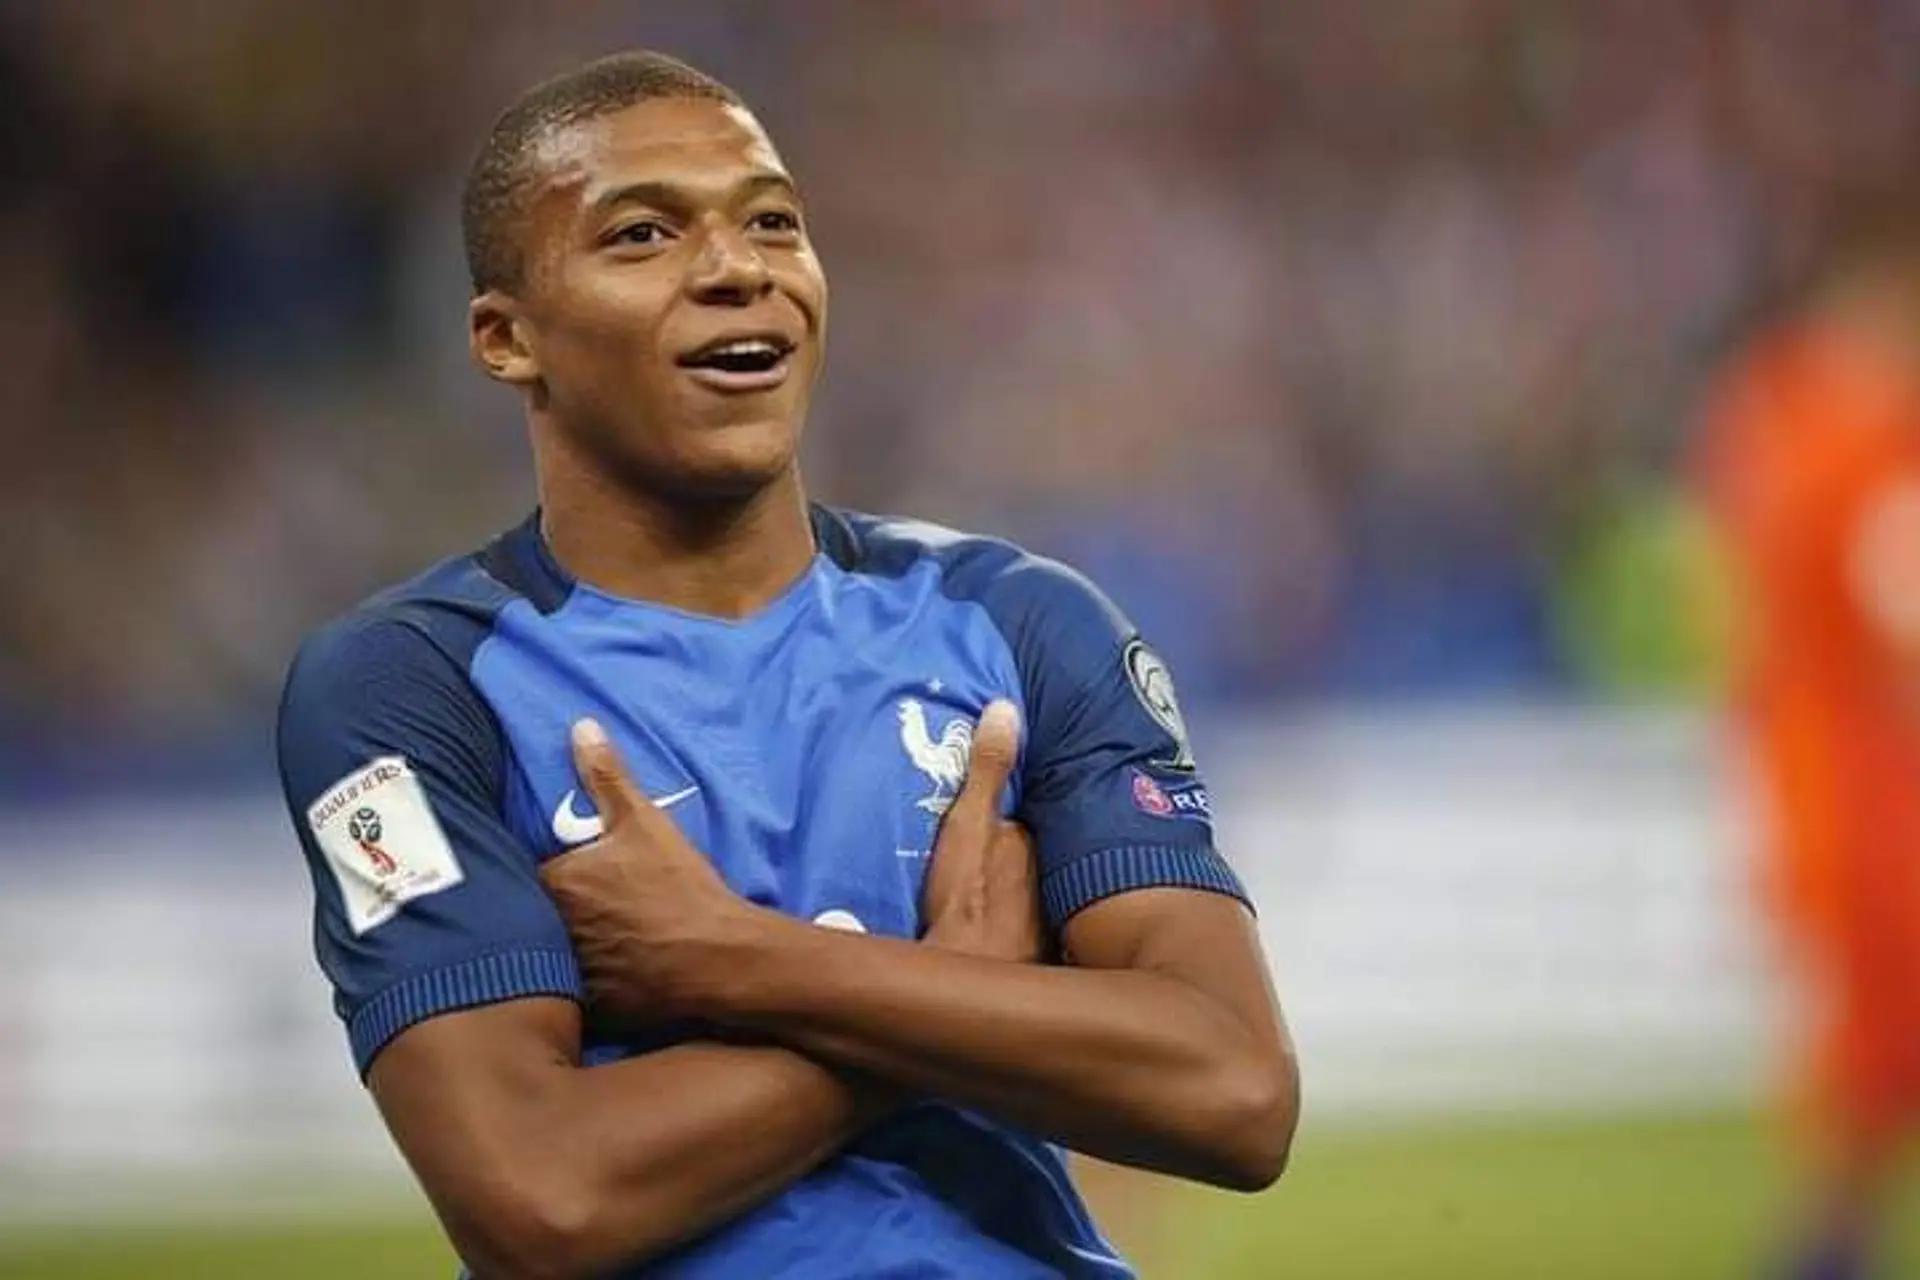 Why Madrid needs hungry and clinical Mbappe to compete in 2020/21 season